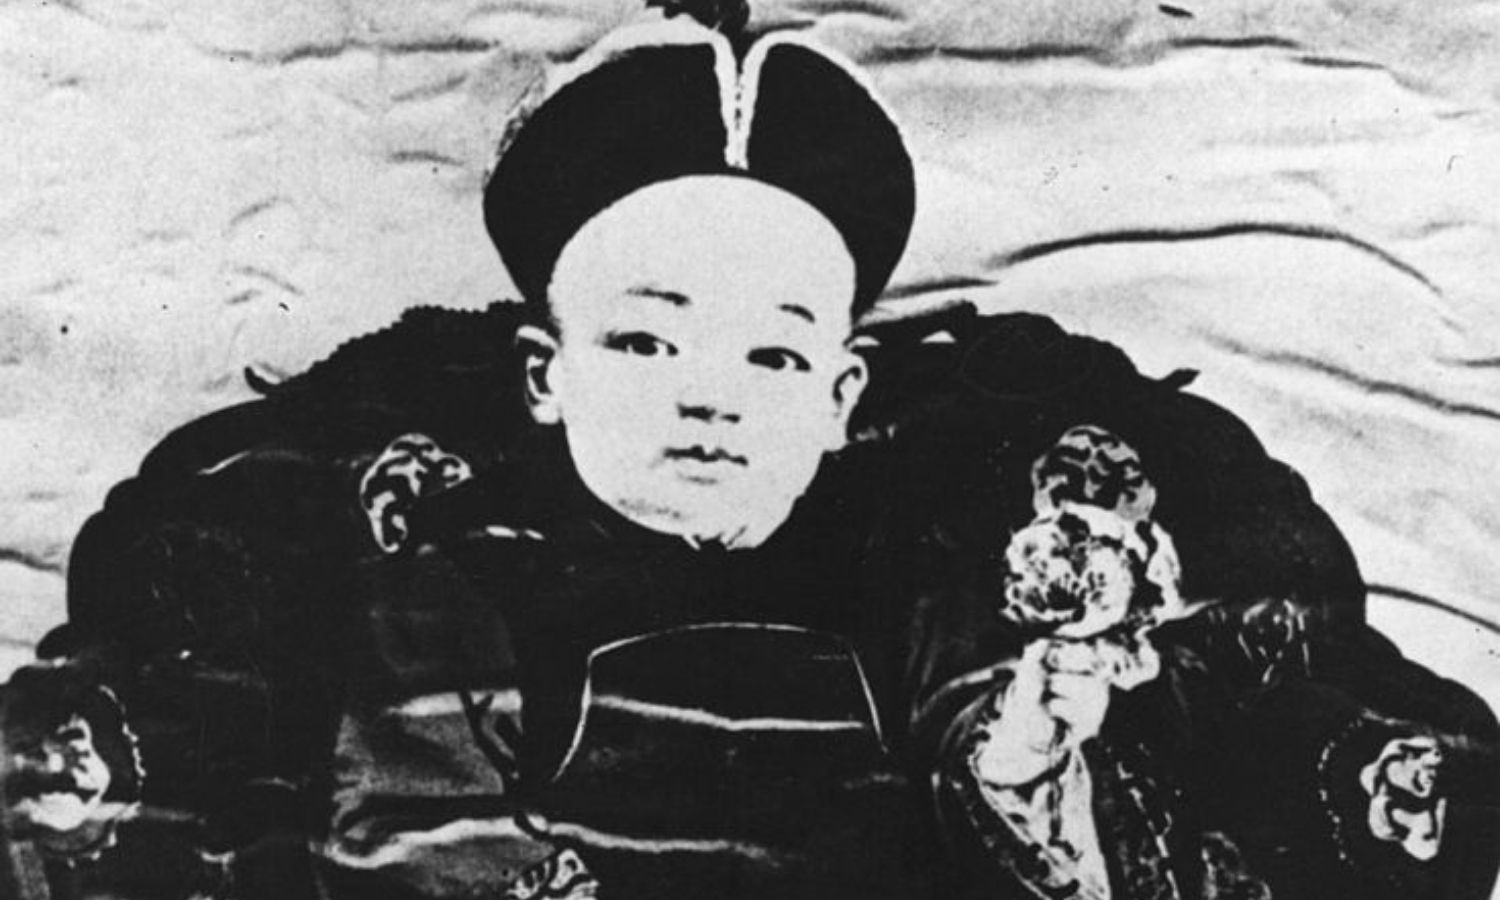 OTD in 1908: The Chinese child Emperor Pu Yi ascended the Chinese throne at the age of two.